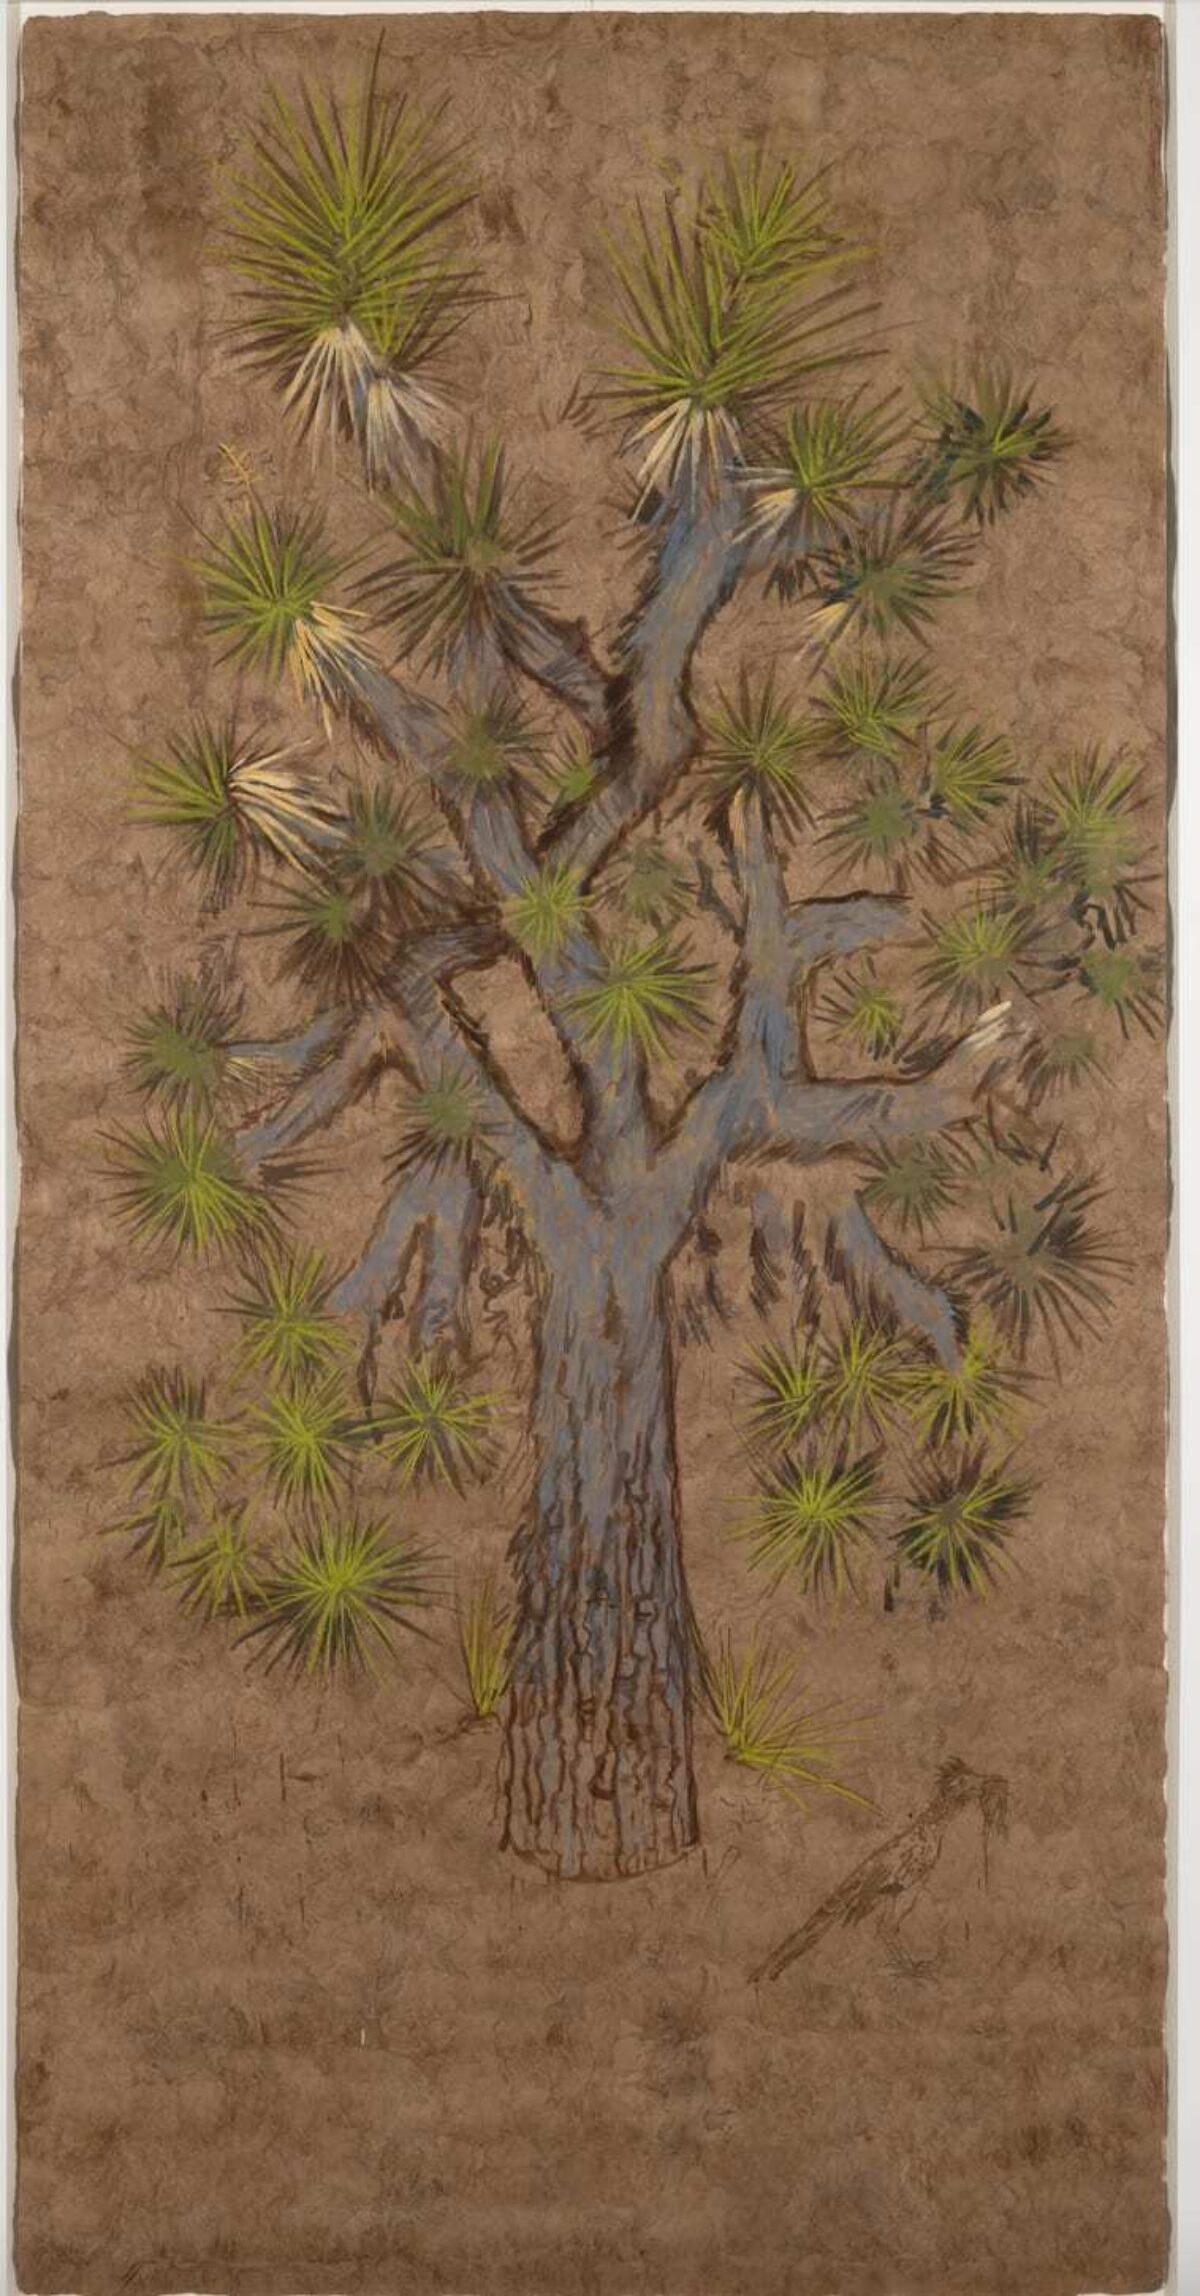 A depiction of a tree.